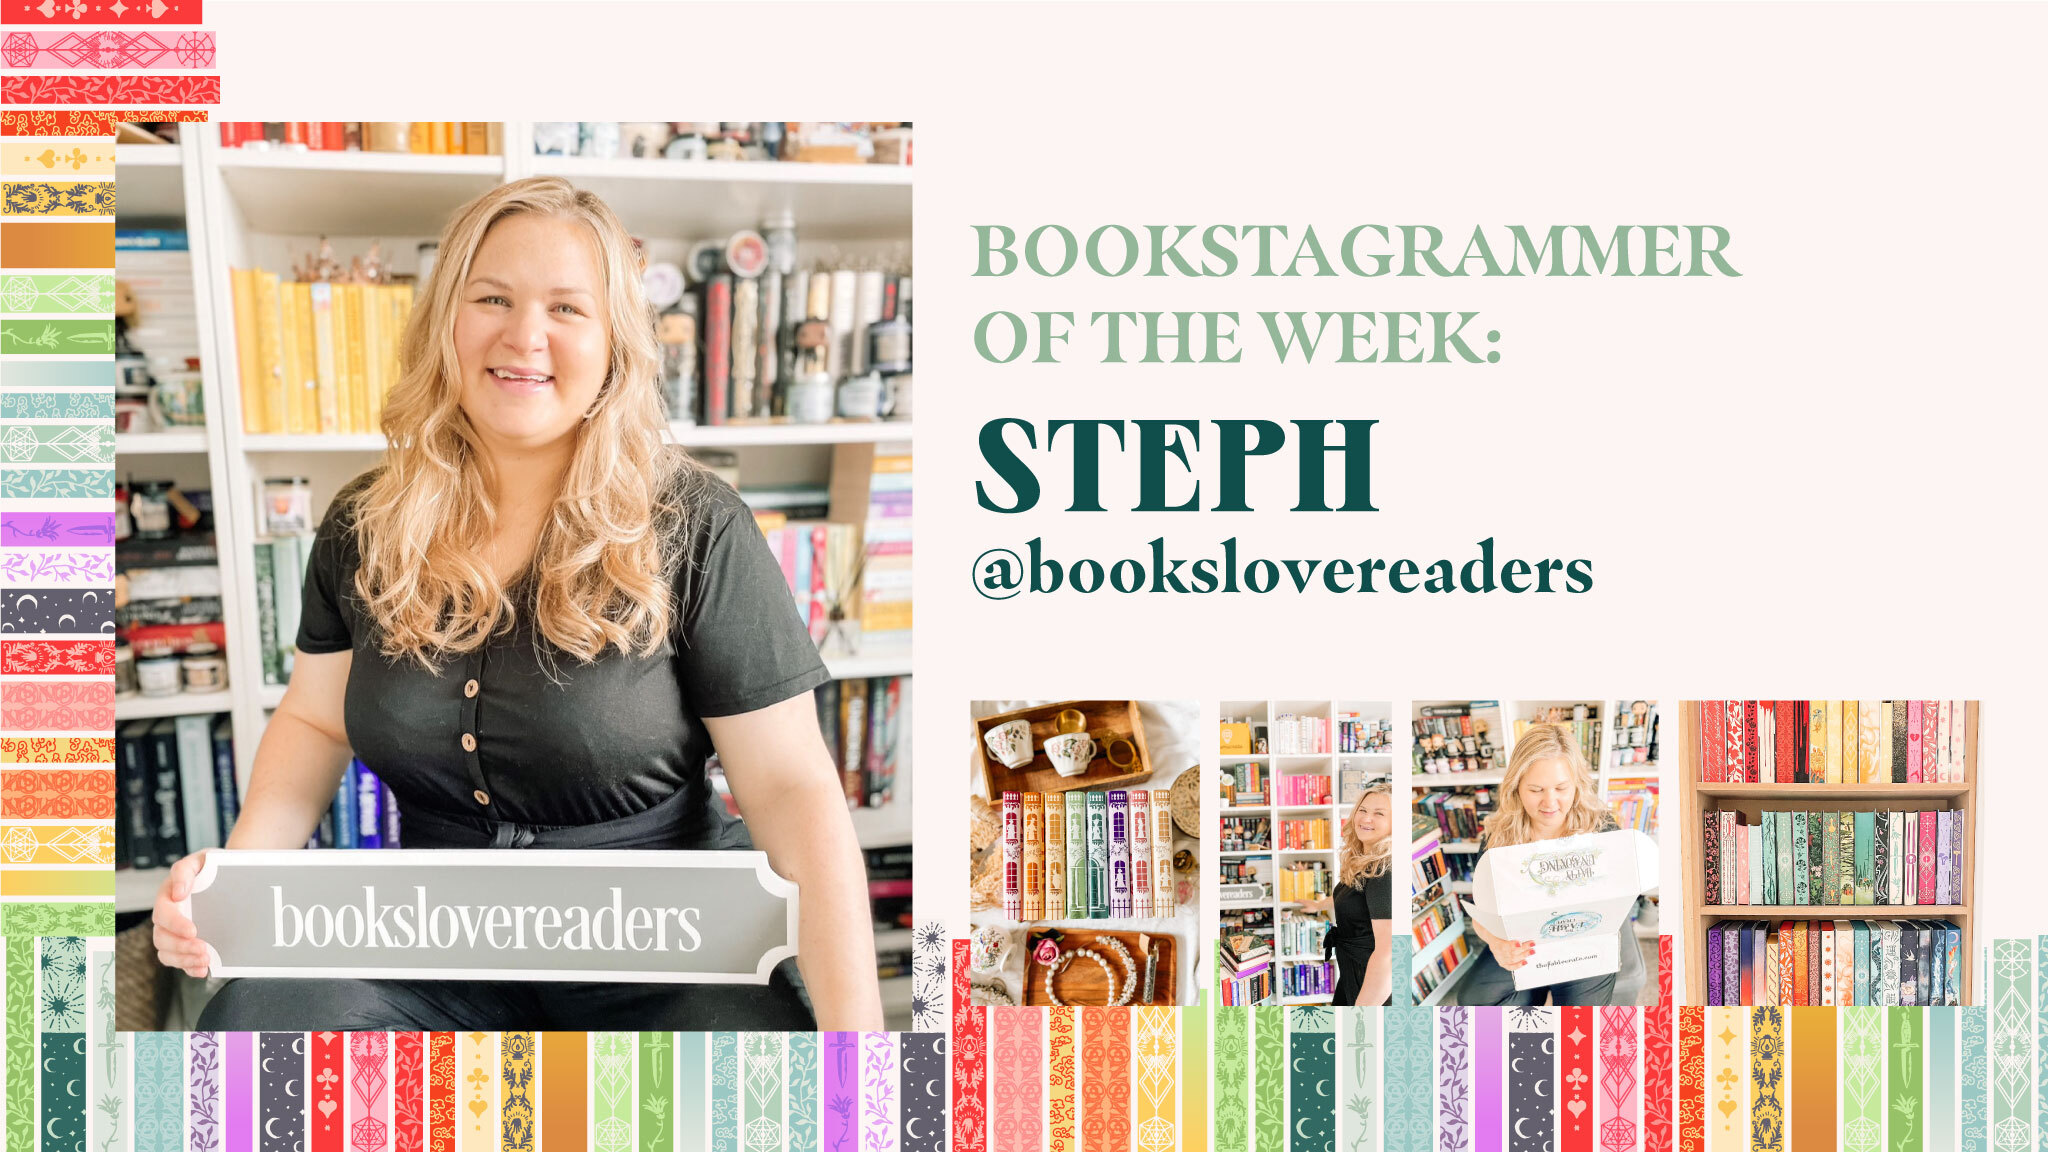 Bookstagrammer Stephanie holding a placard with her Instagram handle @bookslovereaders on it, in front of her white bookshelf